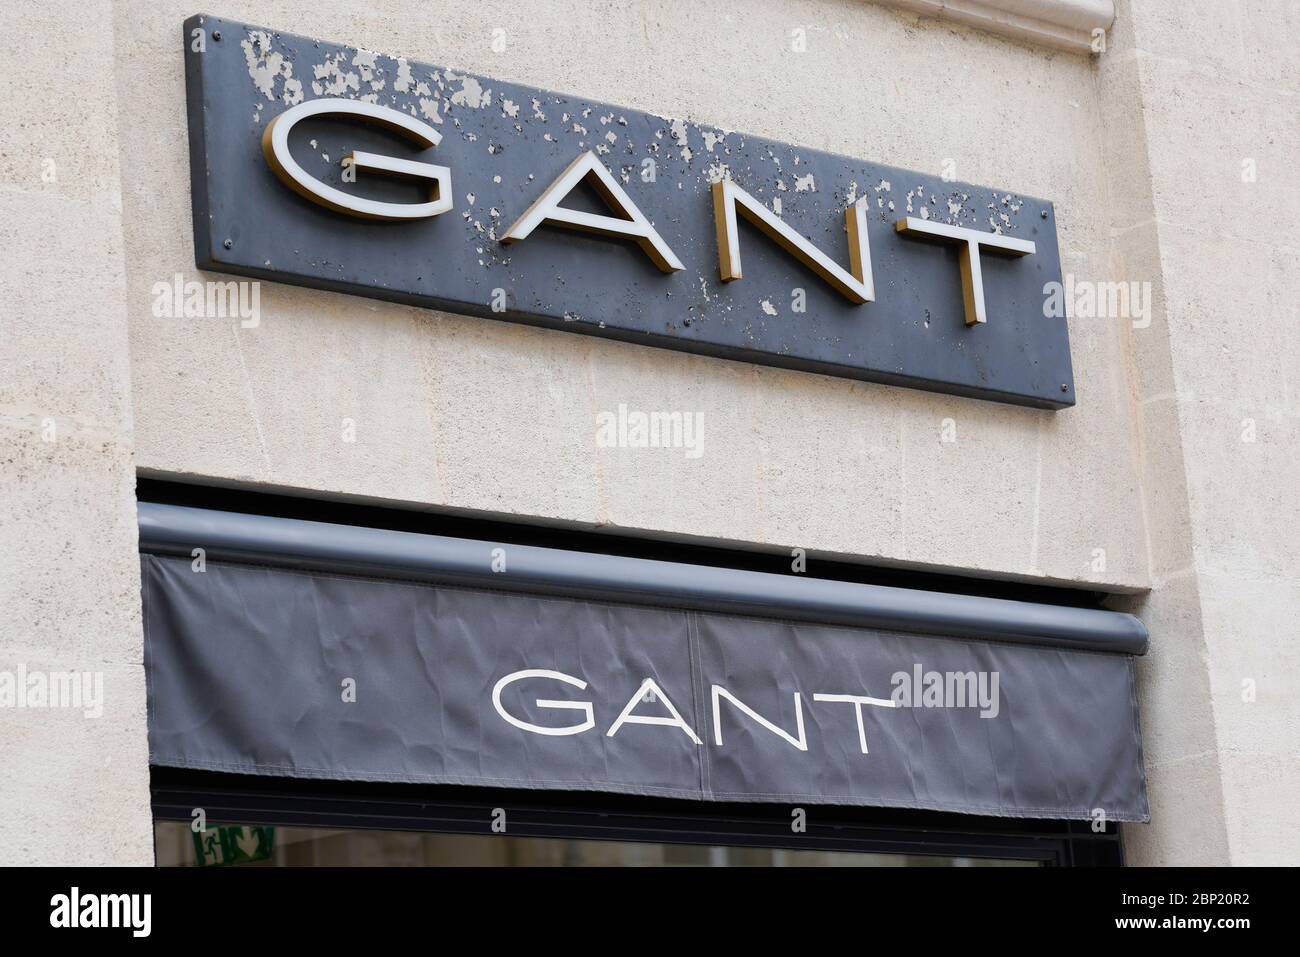 Gant Shop High Resolution Stock Photography and Images - Alamy